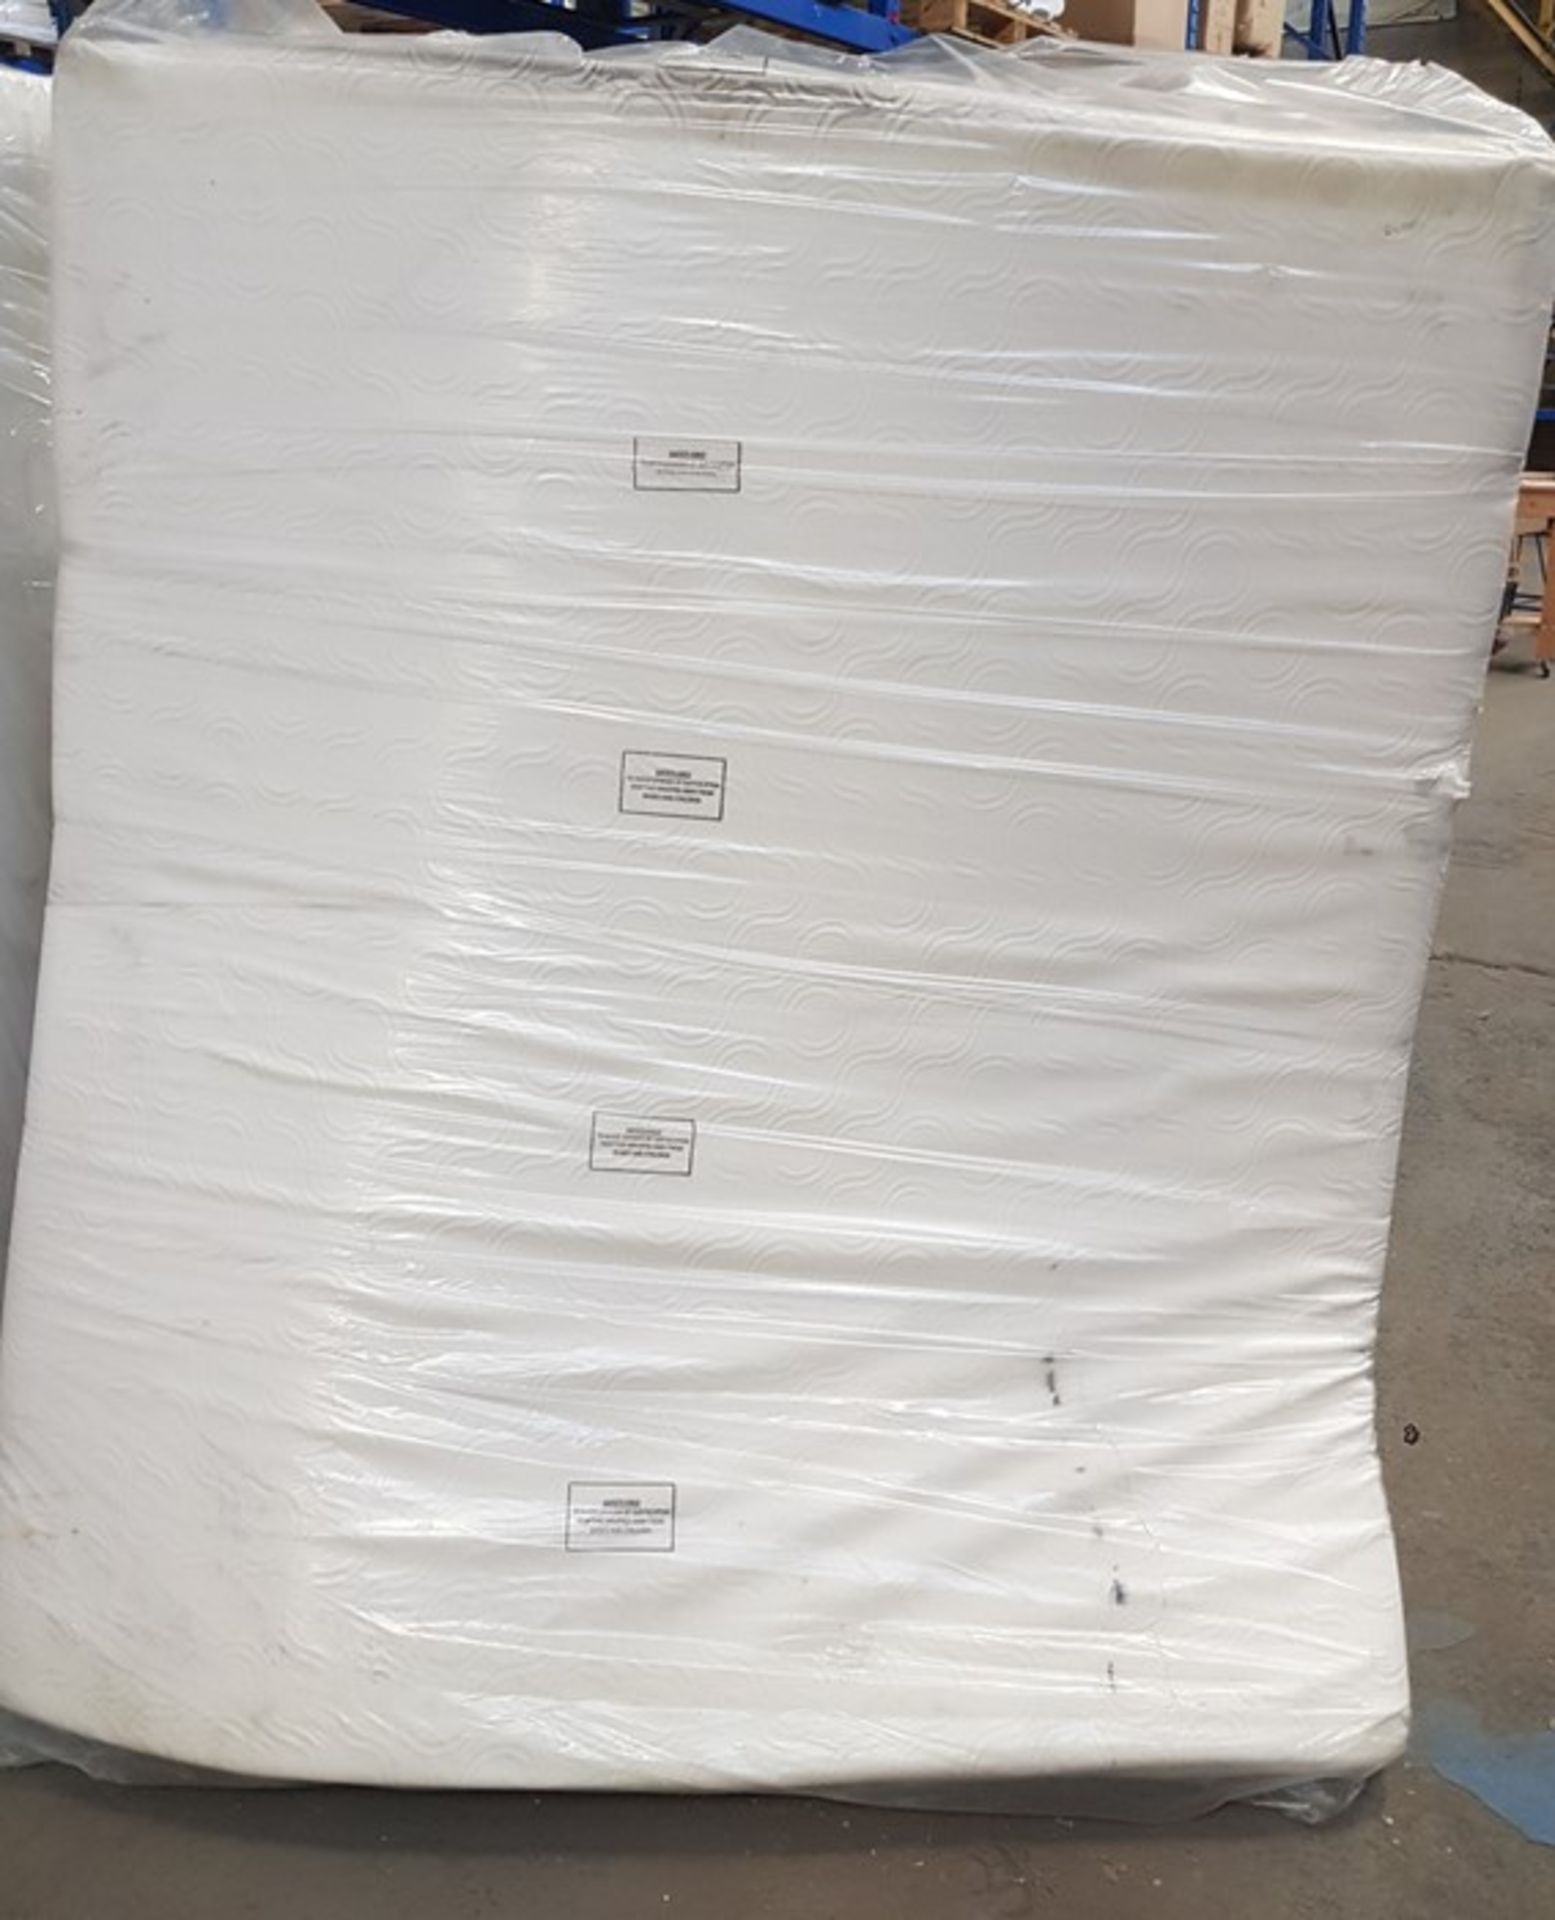 1 BAGGED 165CM KING SIZE MEMORY FOAM MATTRESS / RRP £269.00 (PUBLIC VIEWING AVAILABLE)